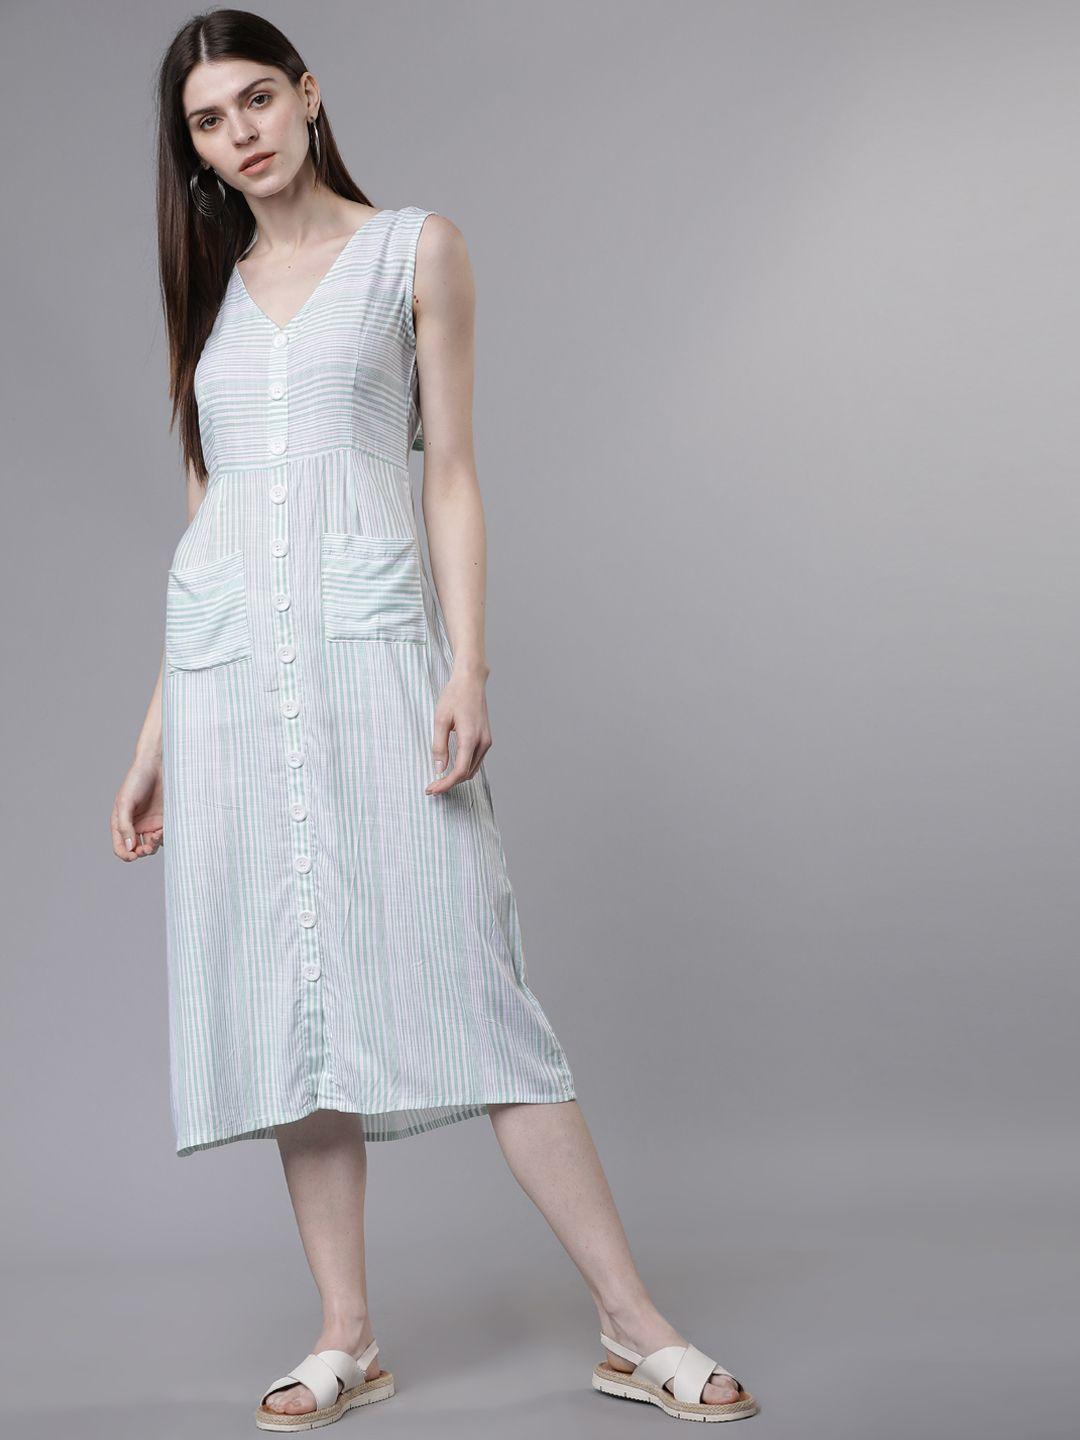 tokyo talkies women green & white striped fit and flare dress